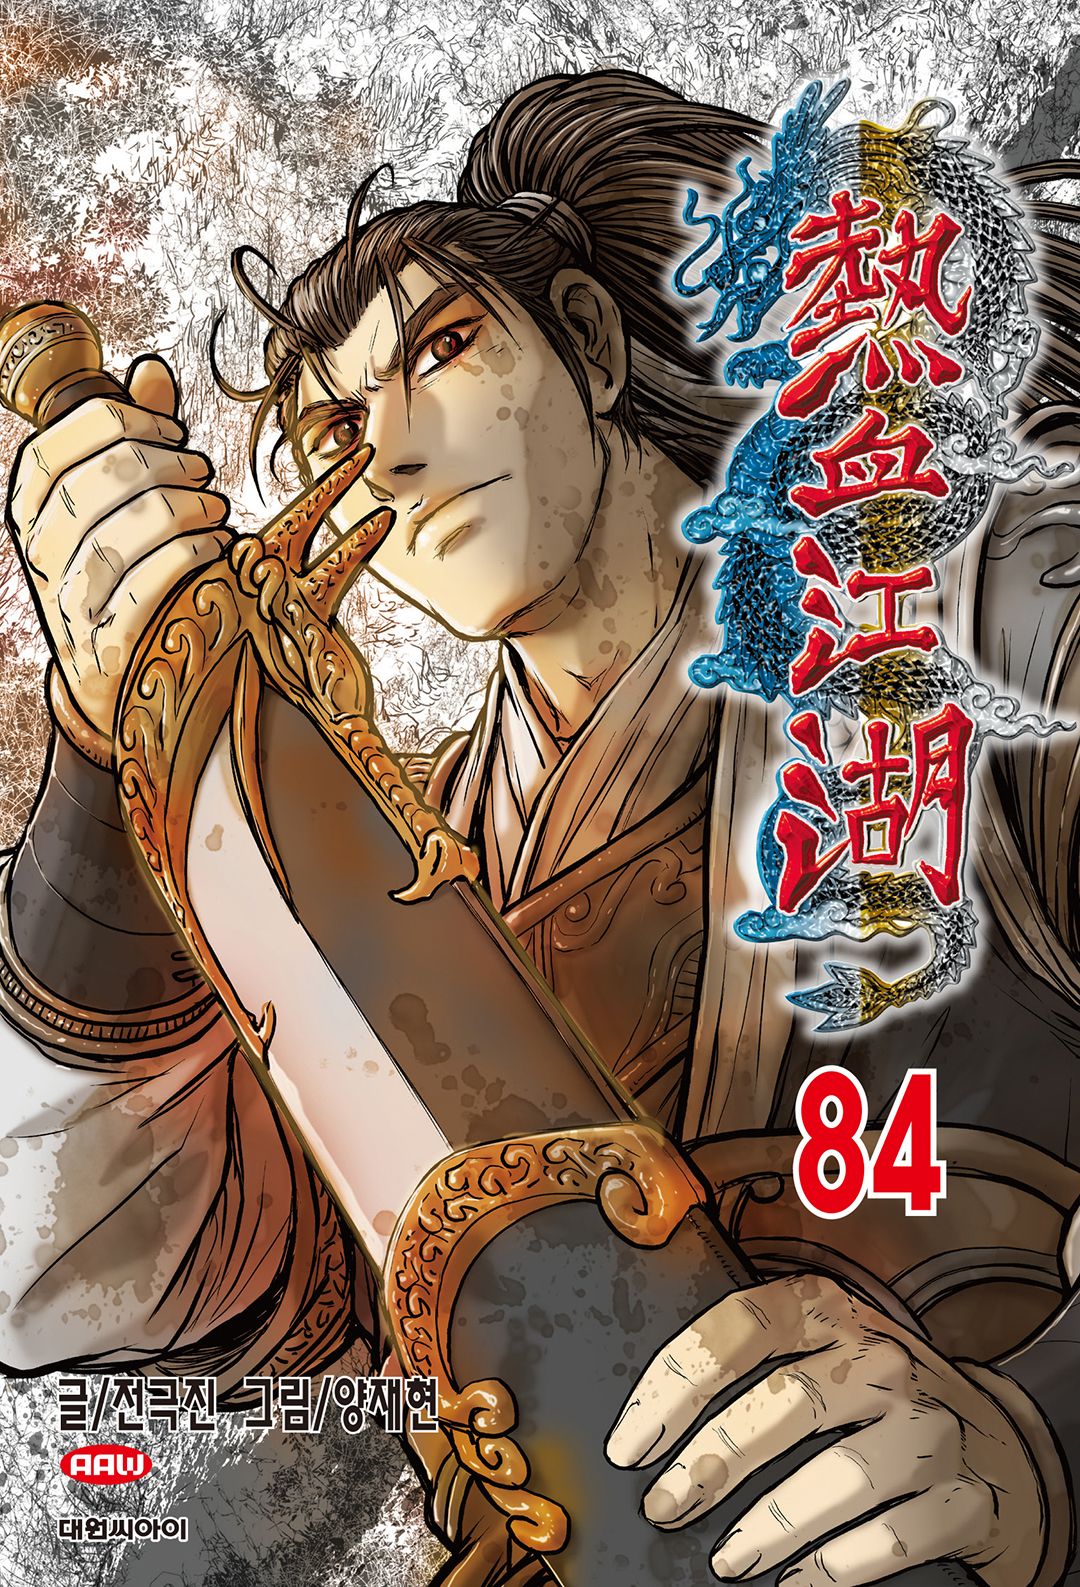 The Ruler of the Land Vol.90 Chapter 673